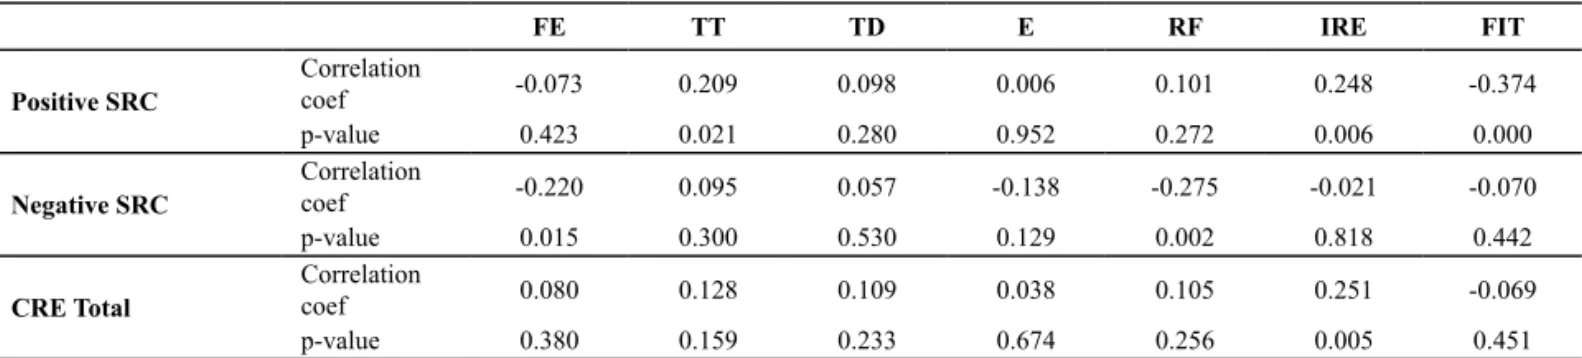 Table 3 – Spearman’s correlation coeficients for sociodemographic variables and Religious/Spiritual Coping - Minas Gerais, 2011